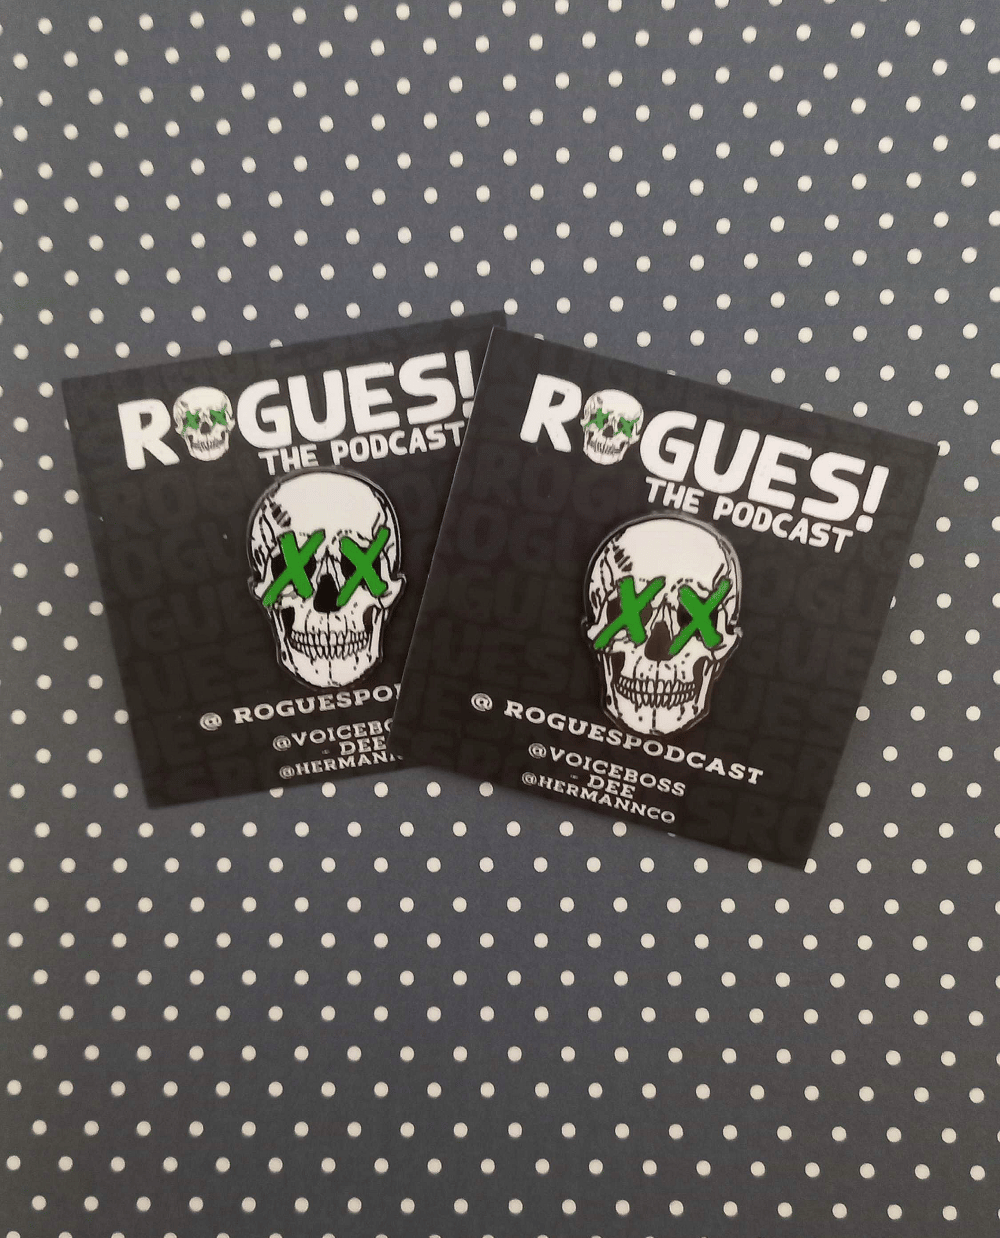 Rogues! The Podcast Hard Enamel pin